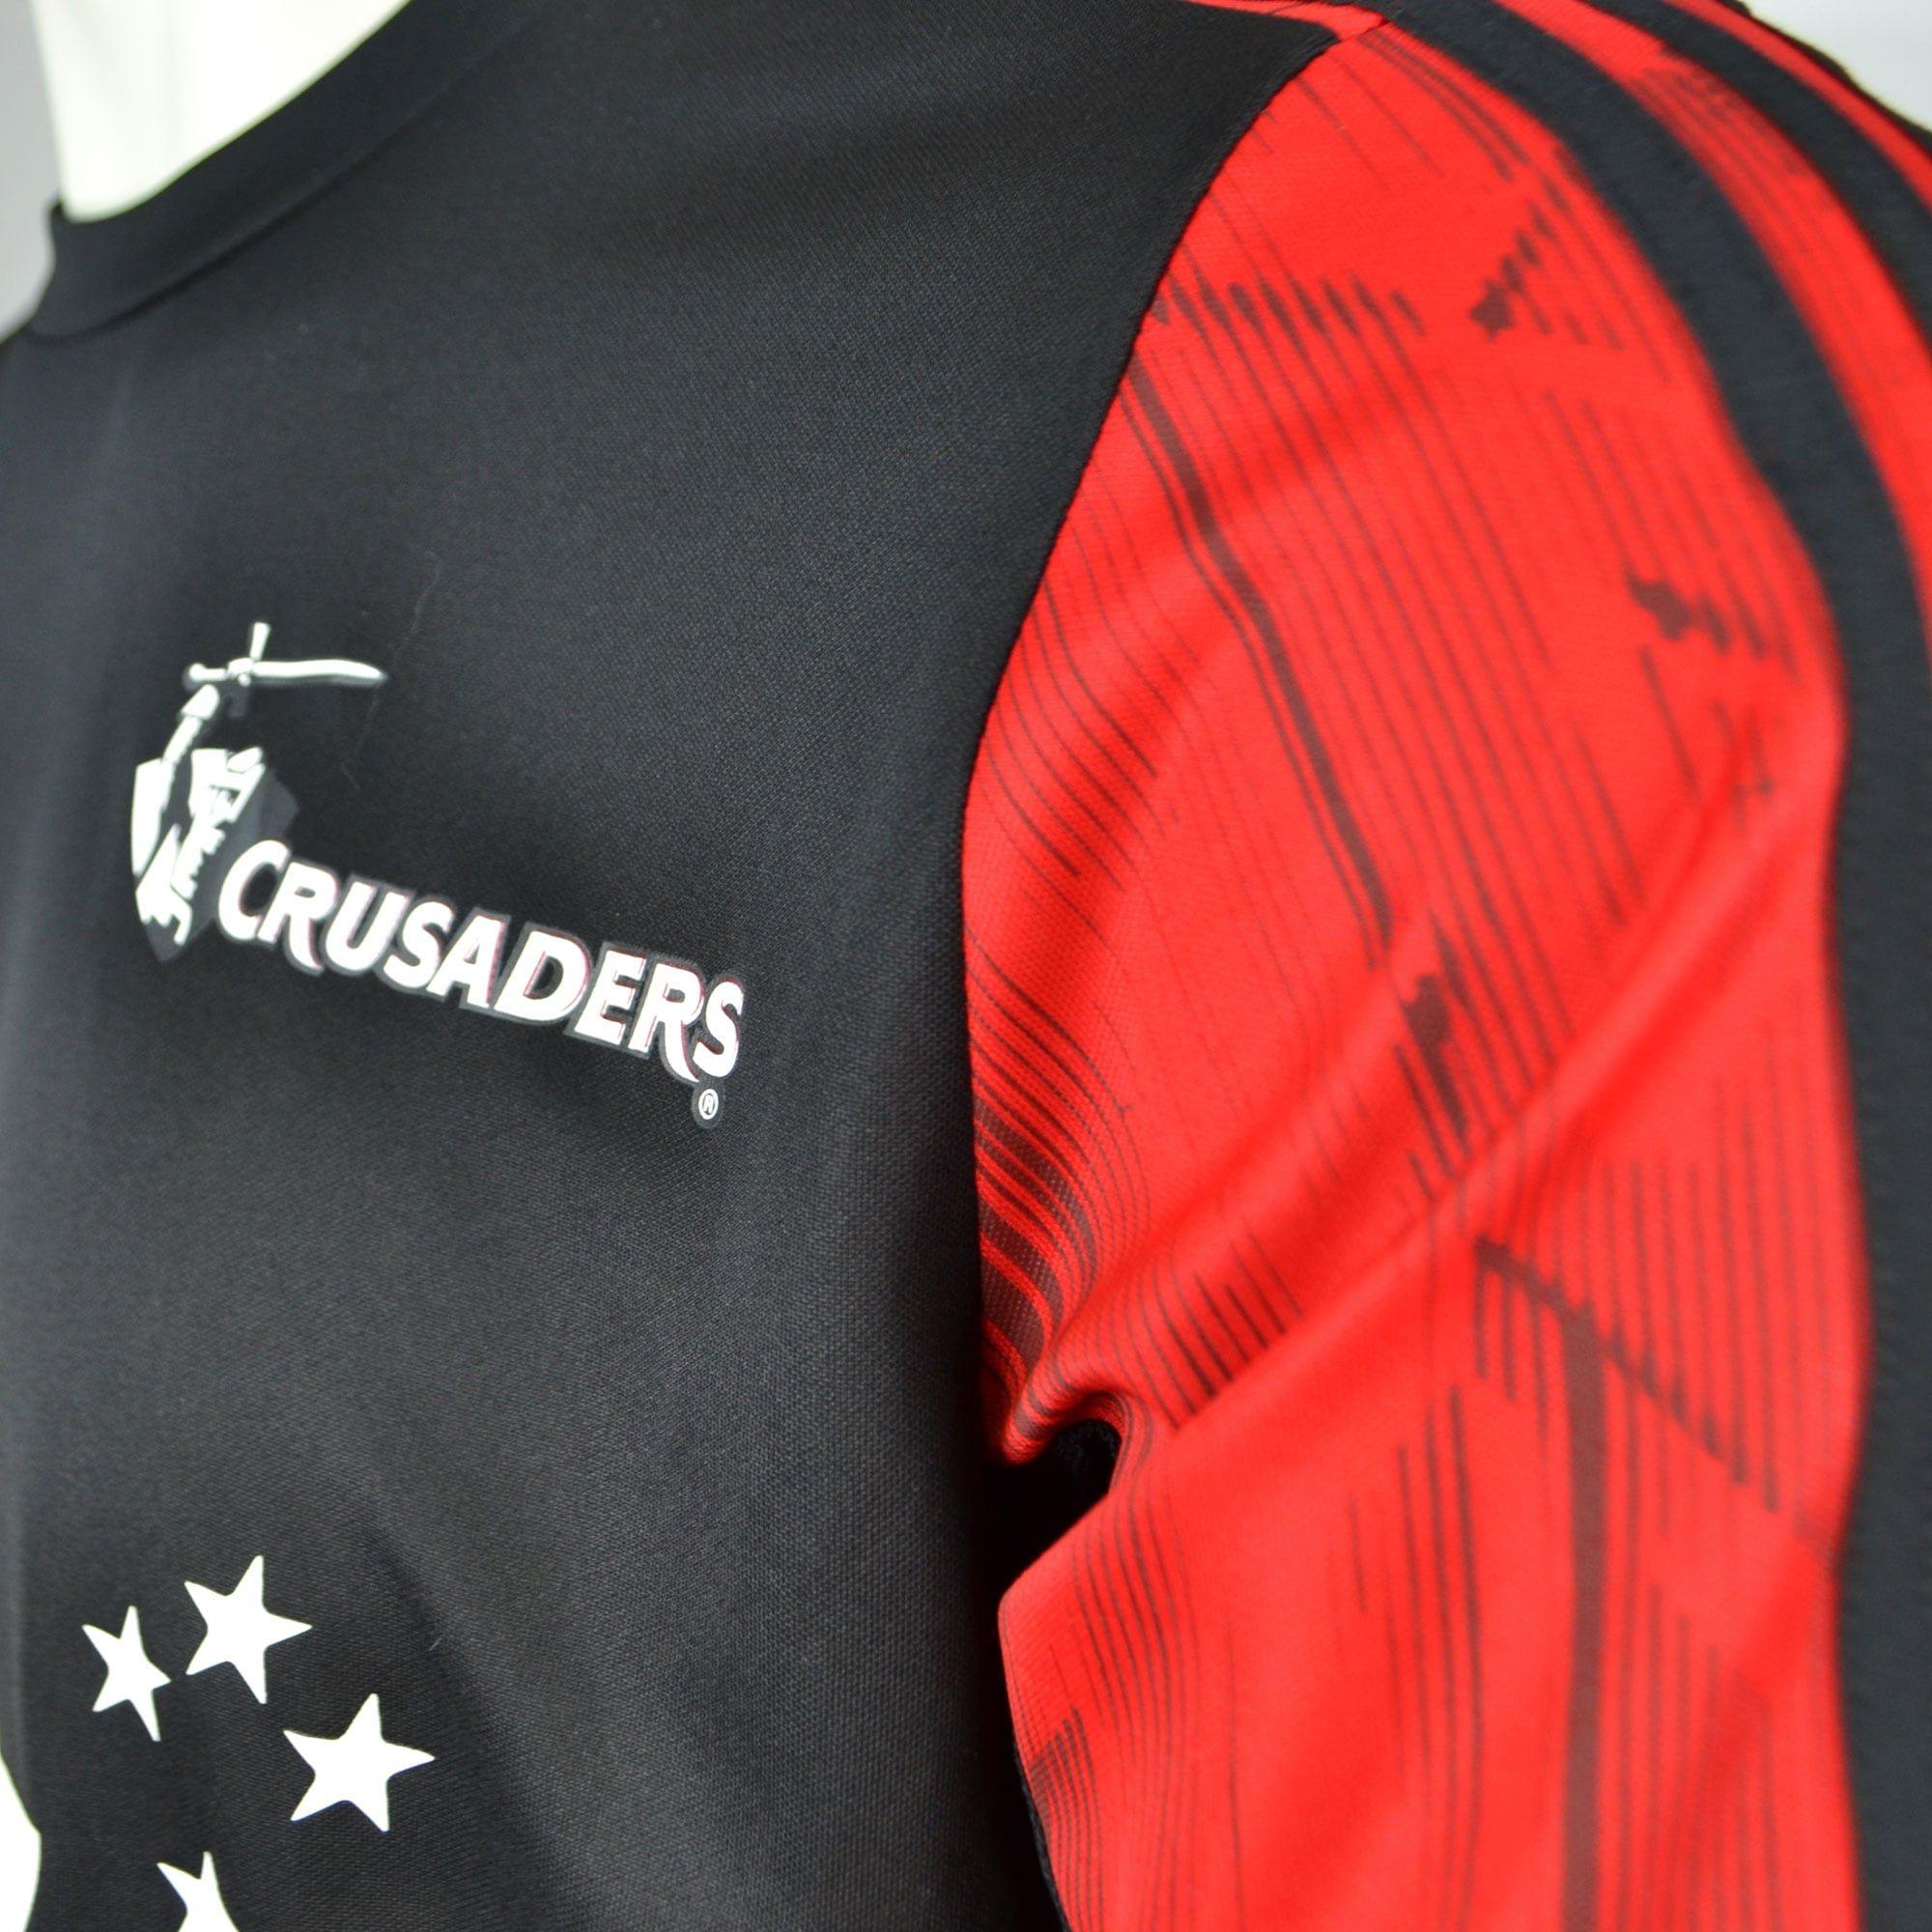 Black and Red Crusaders Logo - Crusaders Performance Rugby T-Shirt 2018 - Black and Red